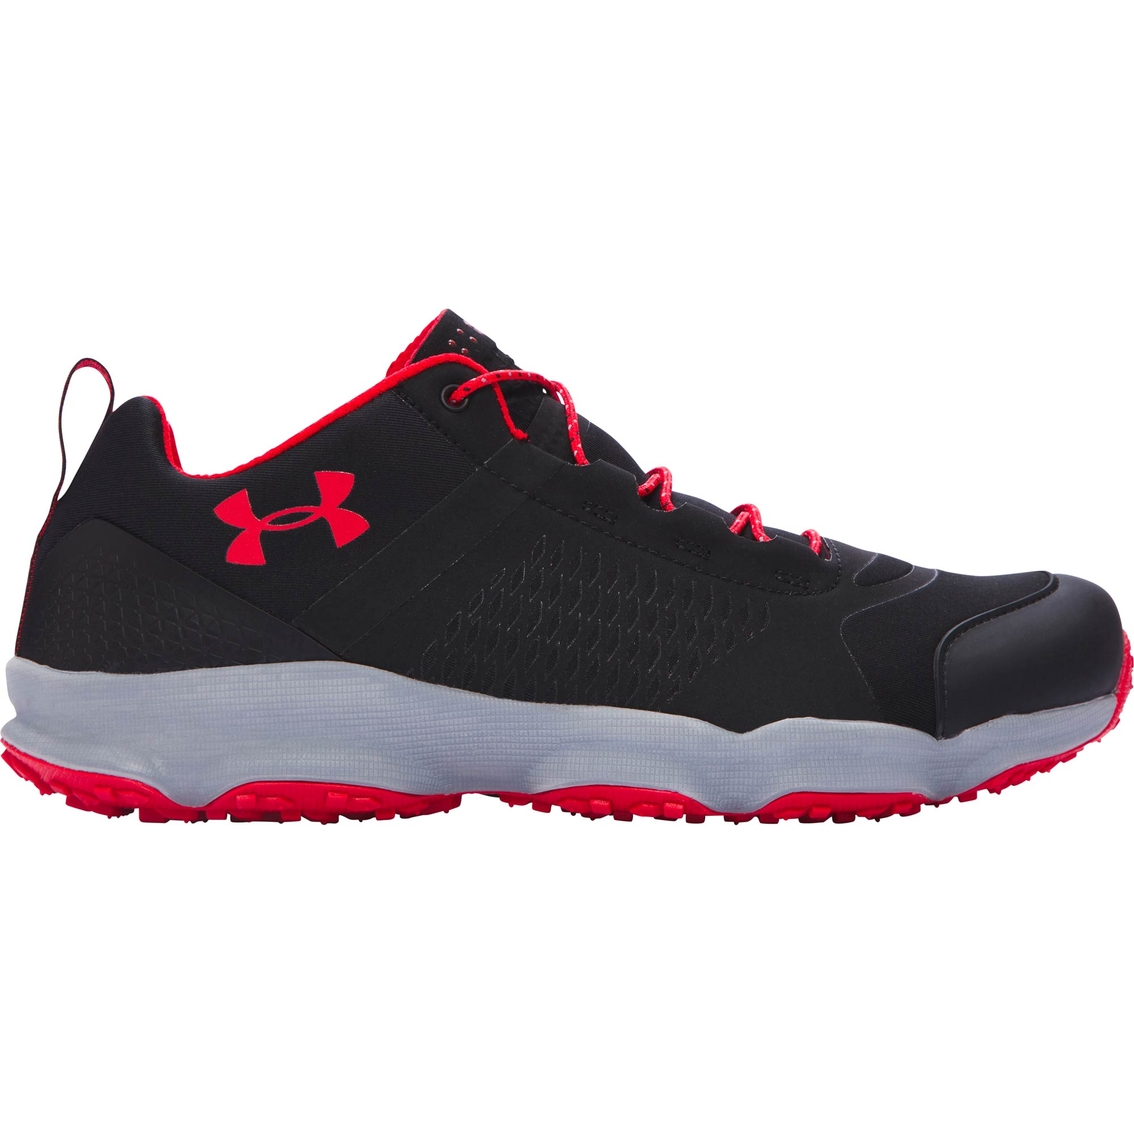 Under Armour Men's Ua Speedfit Low Trail Running Shoes | Hiking & Trail ...